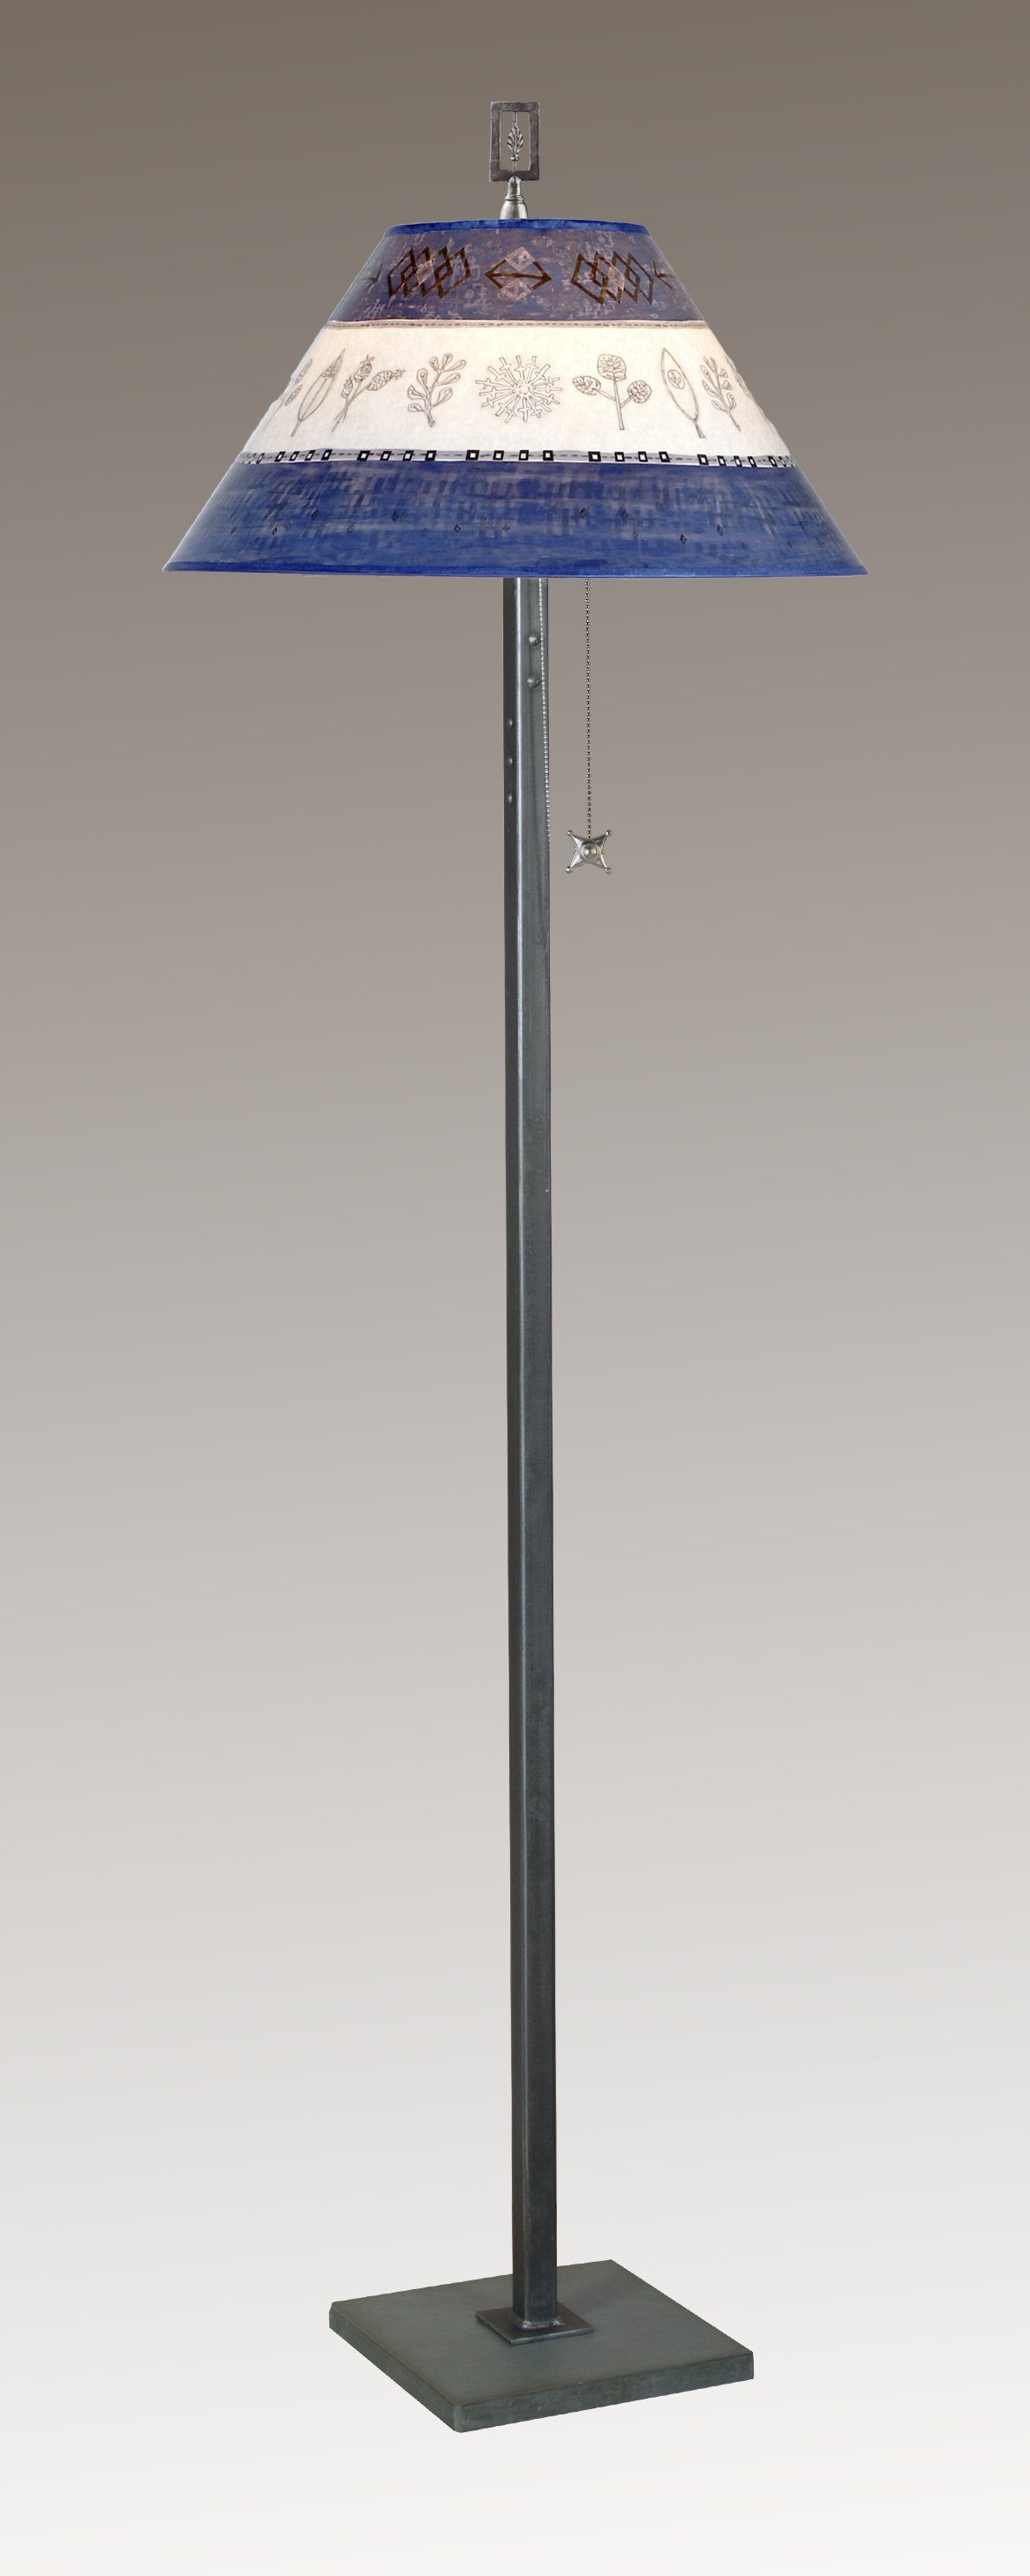 Steel Floor Lamp with Large Conical Shade in Woven Sprig &amp; Sapphire